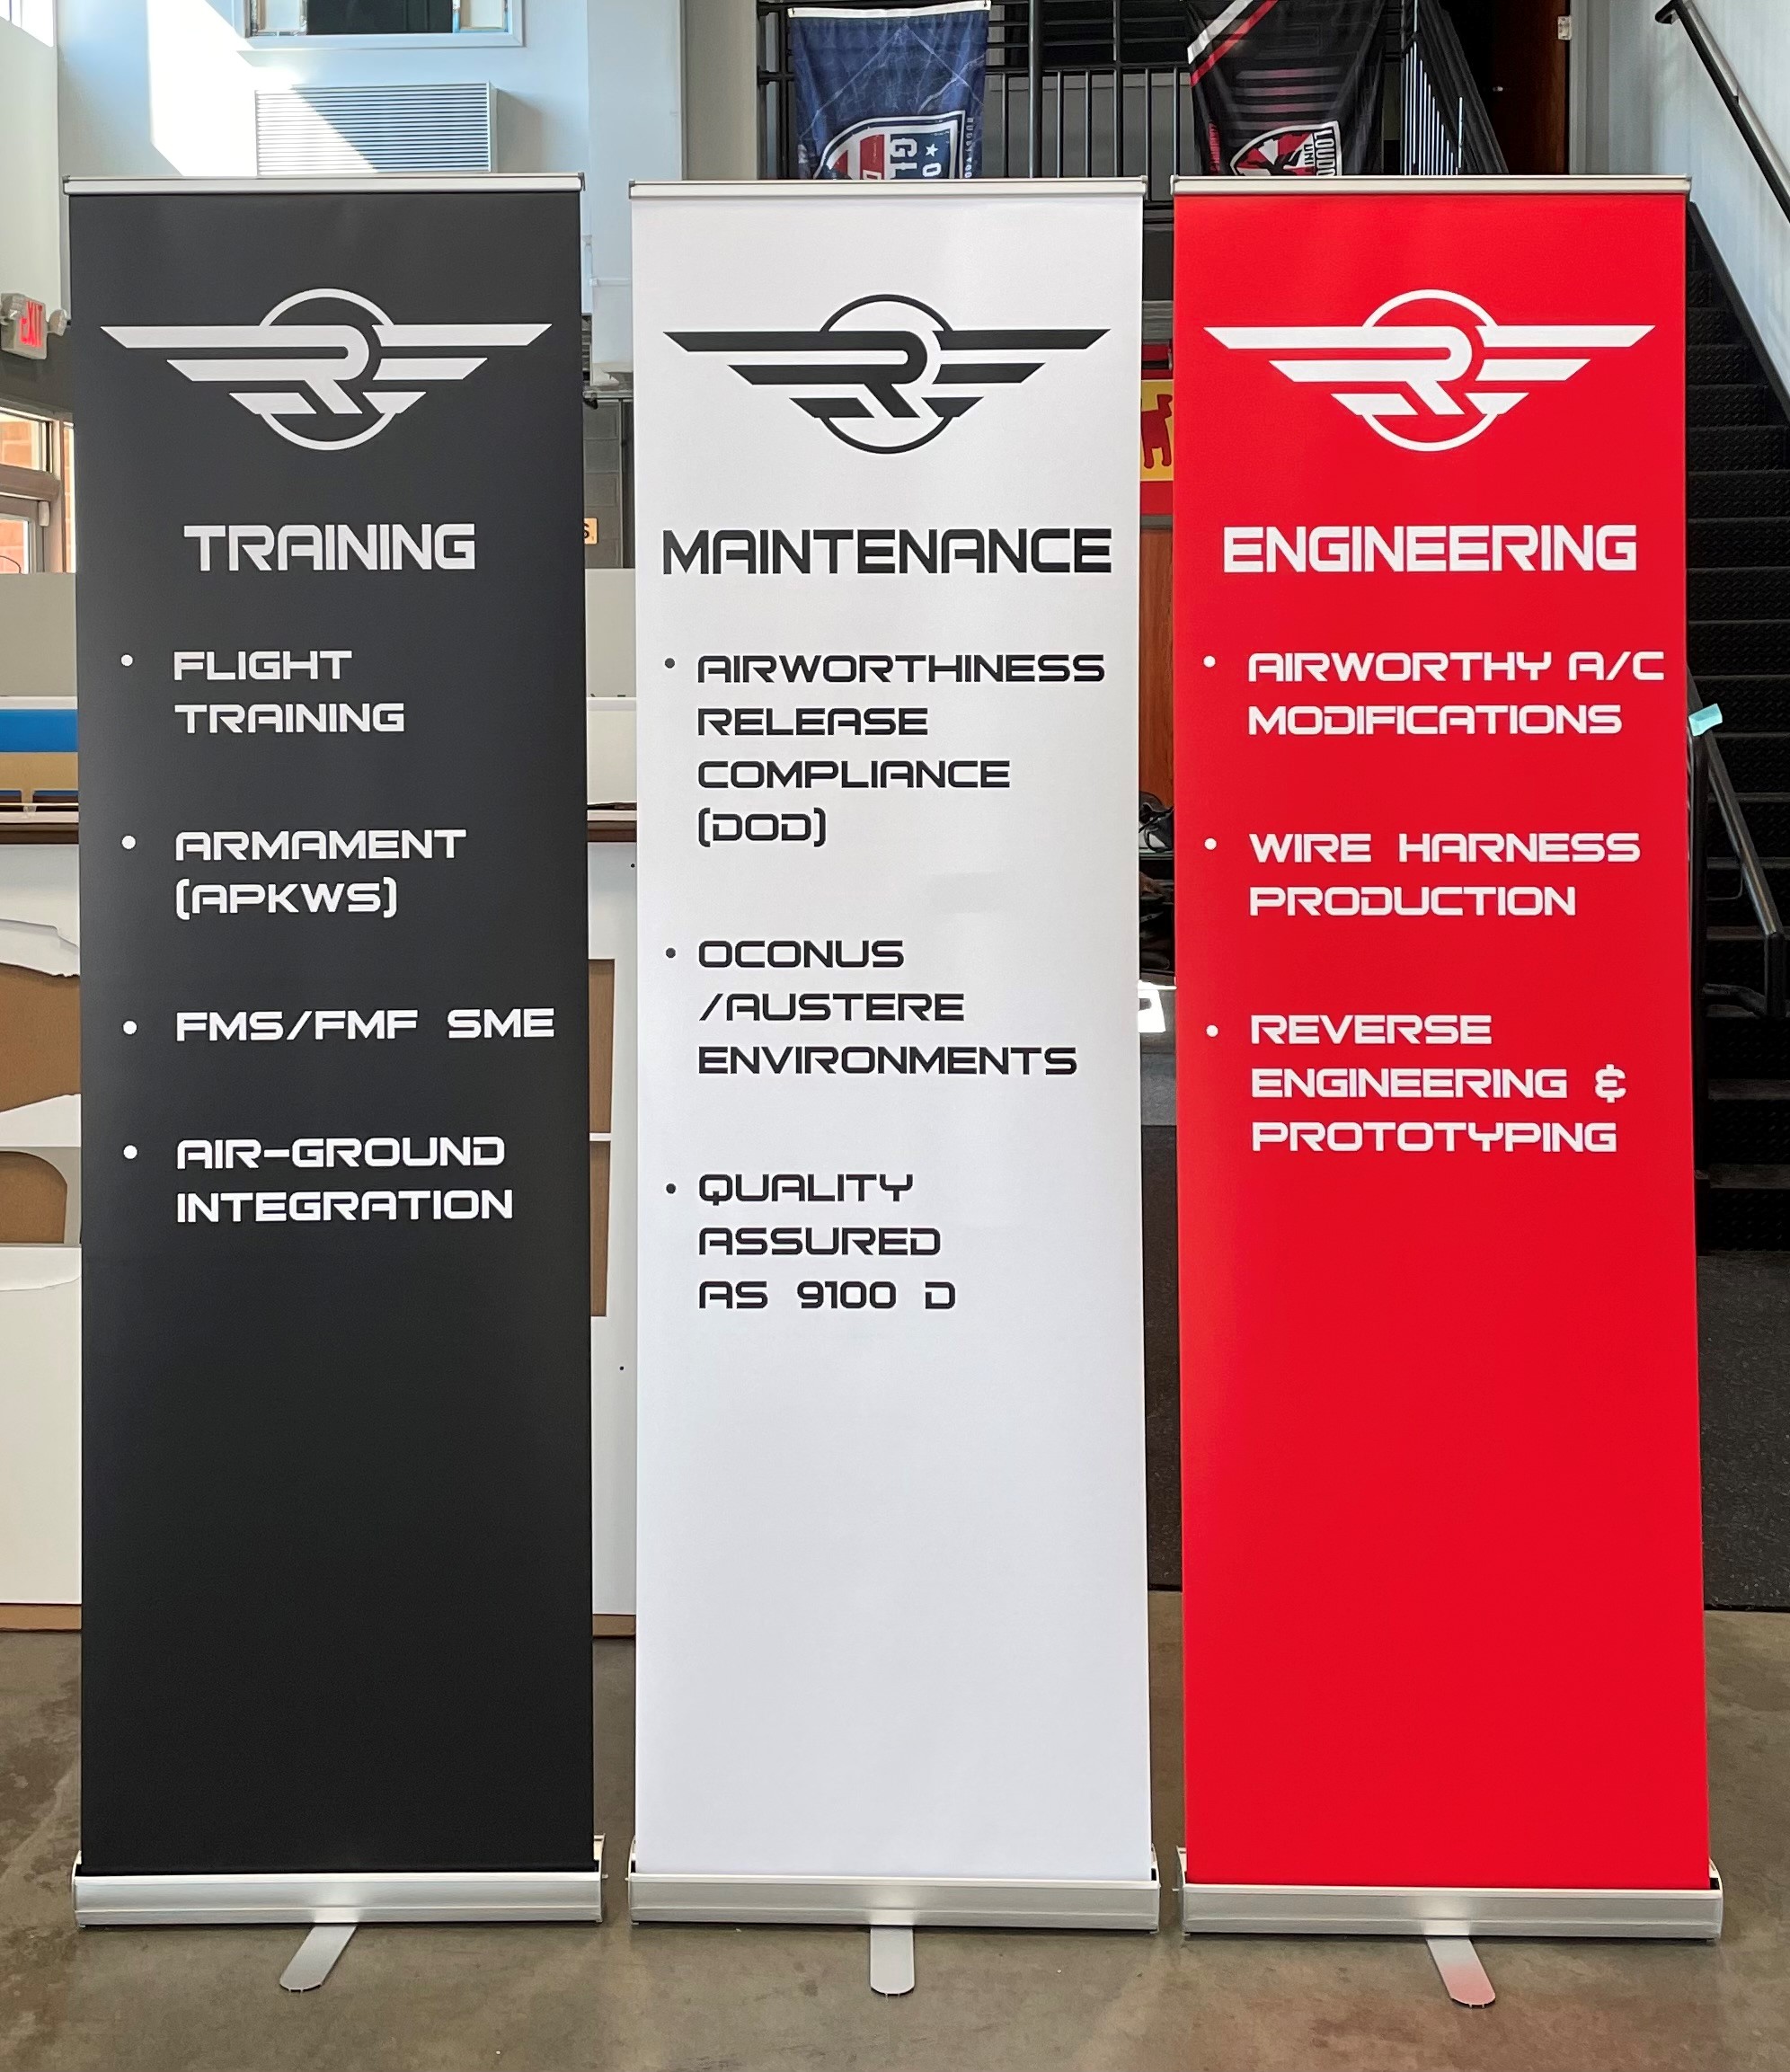 Bannerstands are great ways to capture attention at meetings